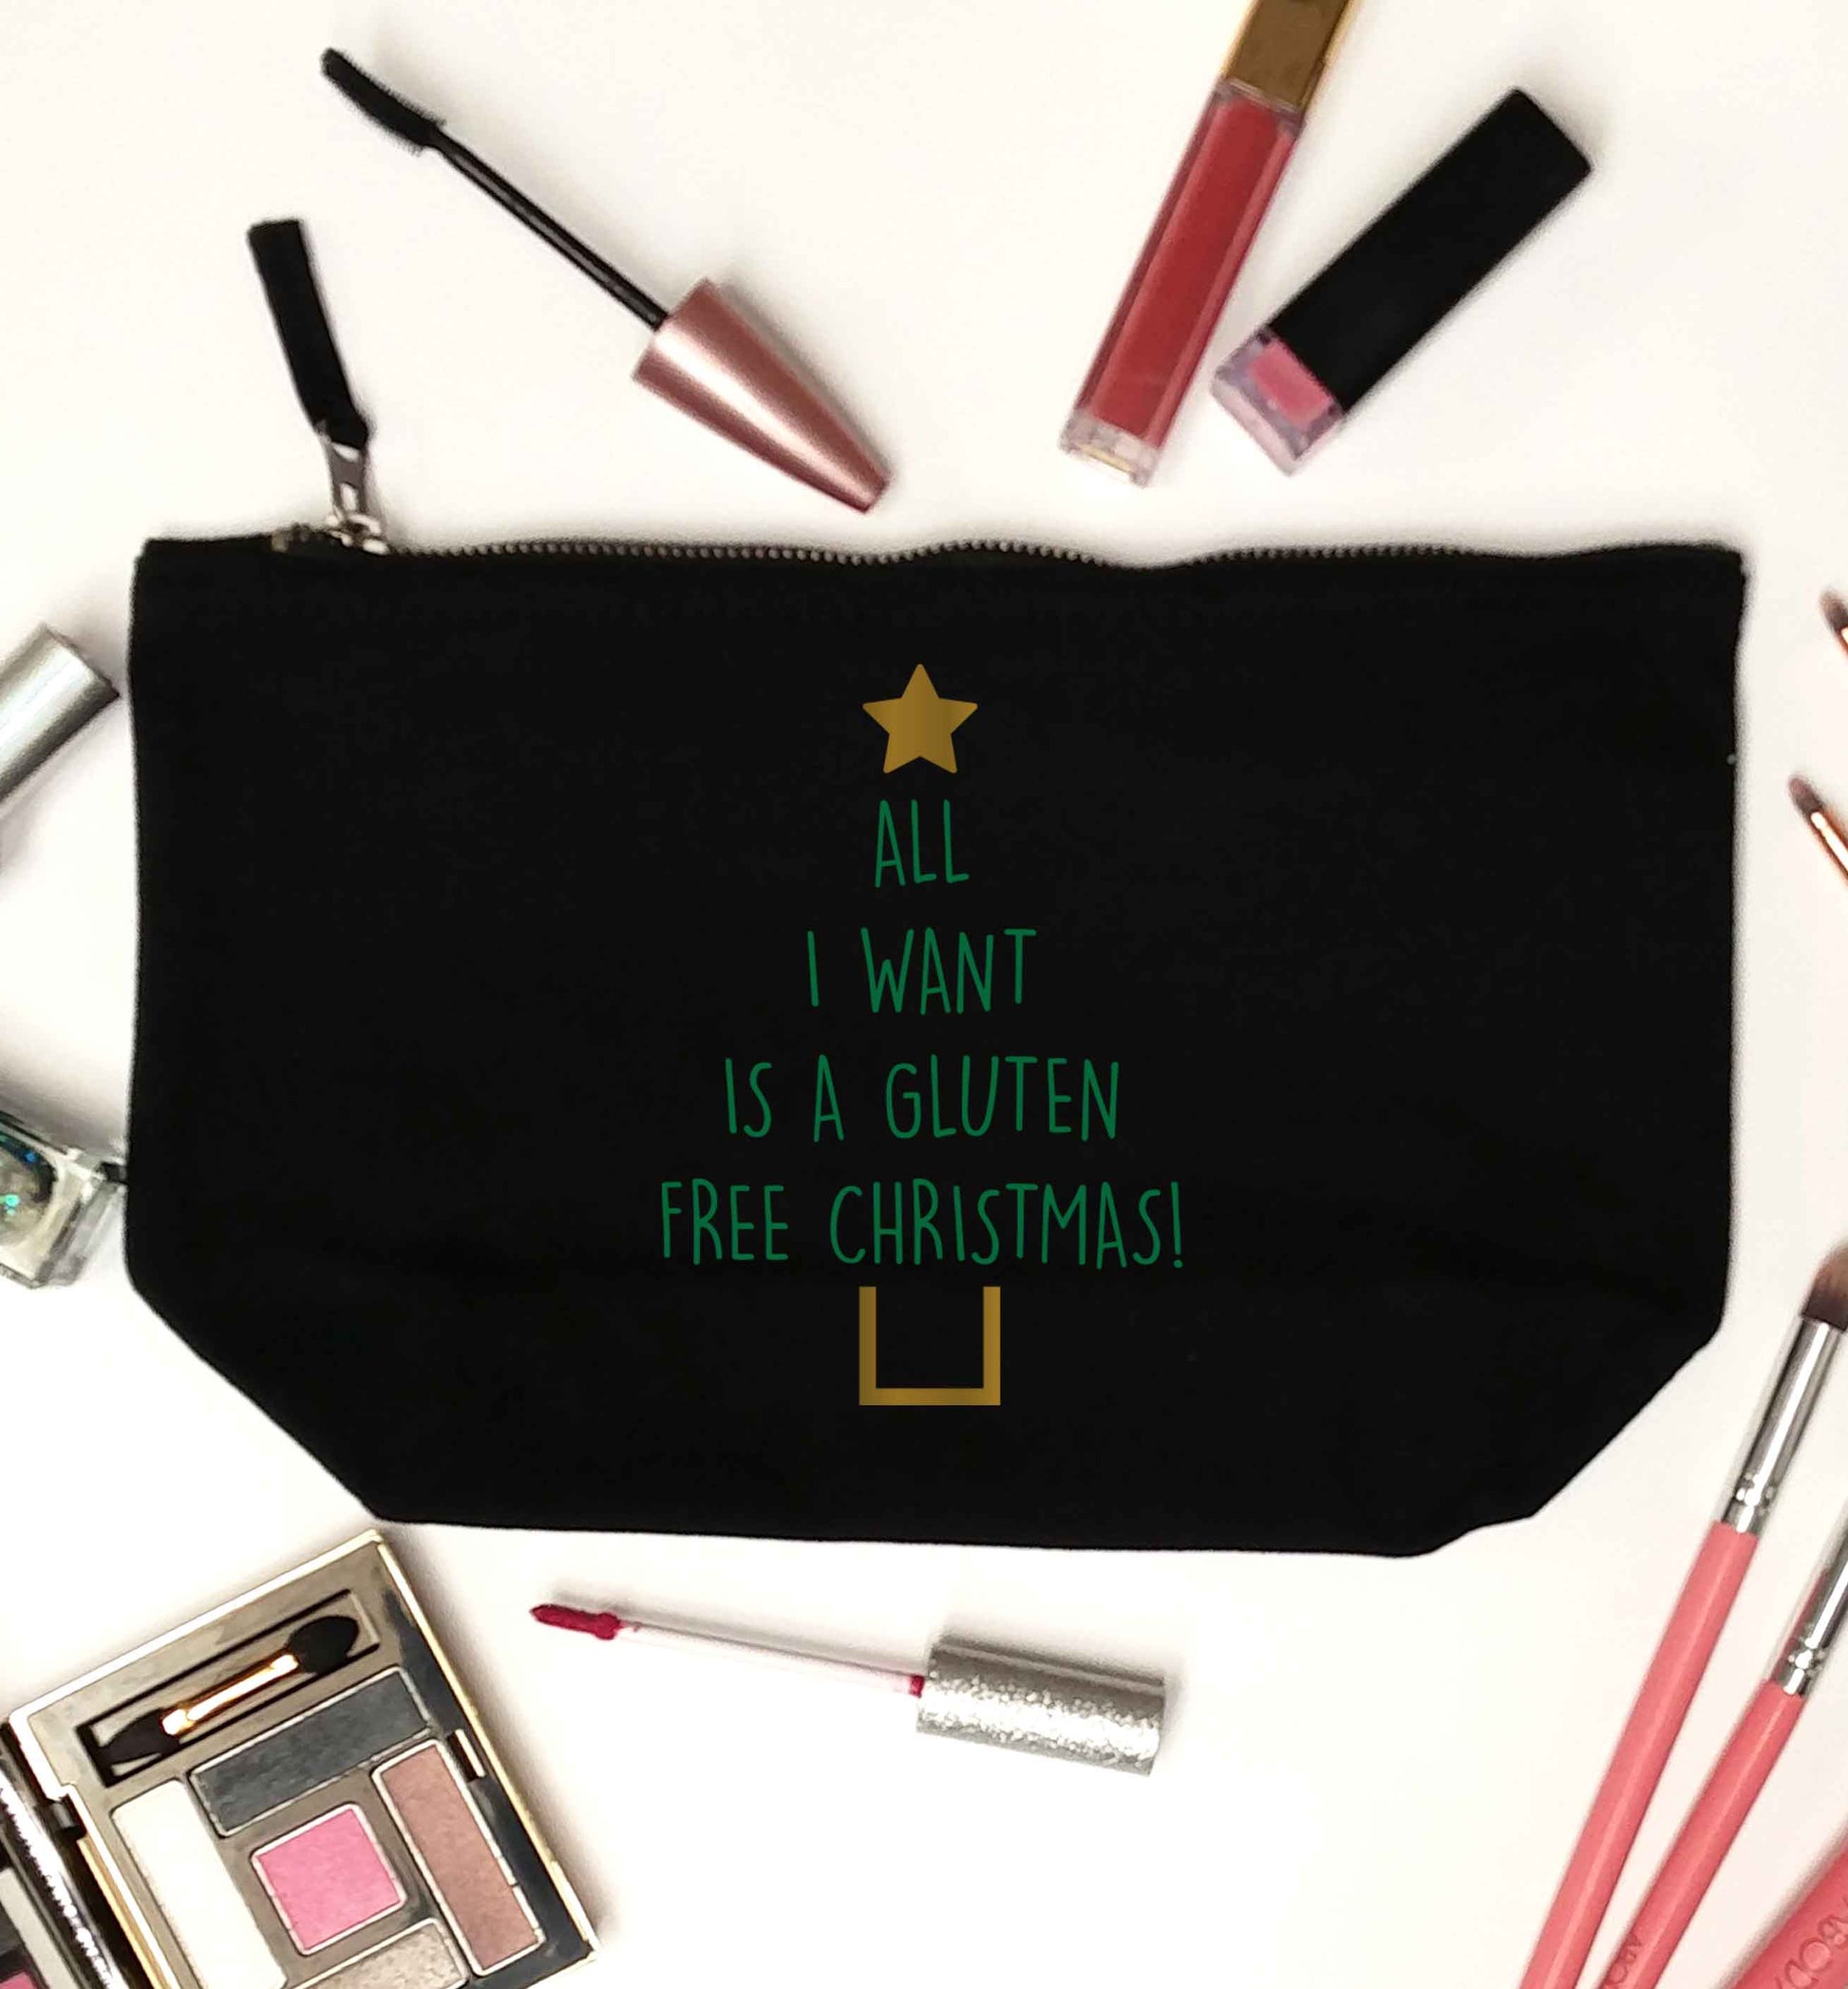 All I want is a gluten free Christmas black makeup bag